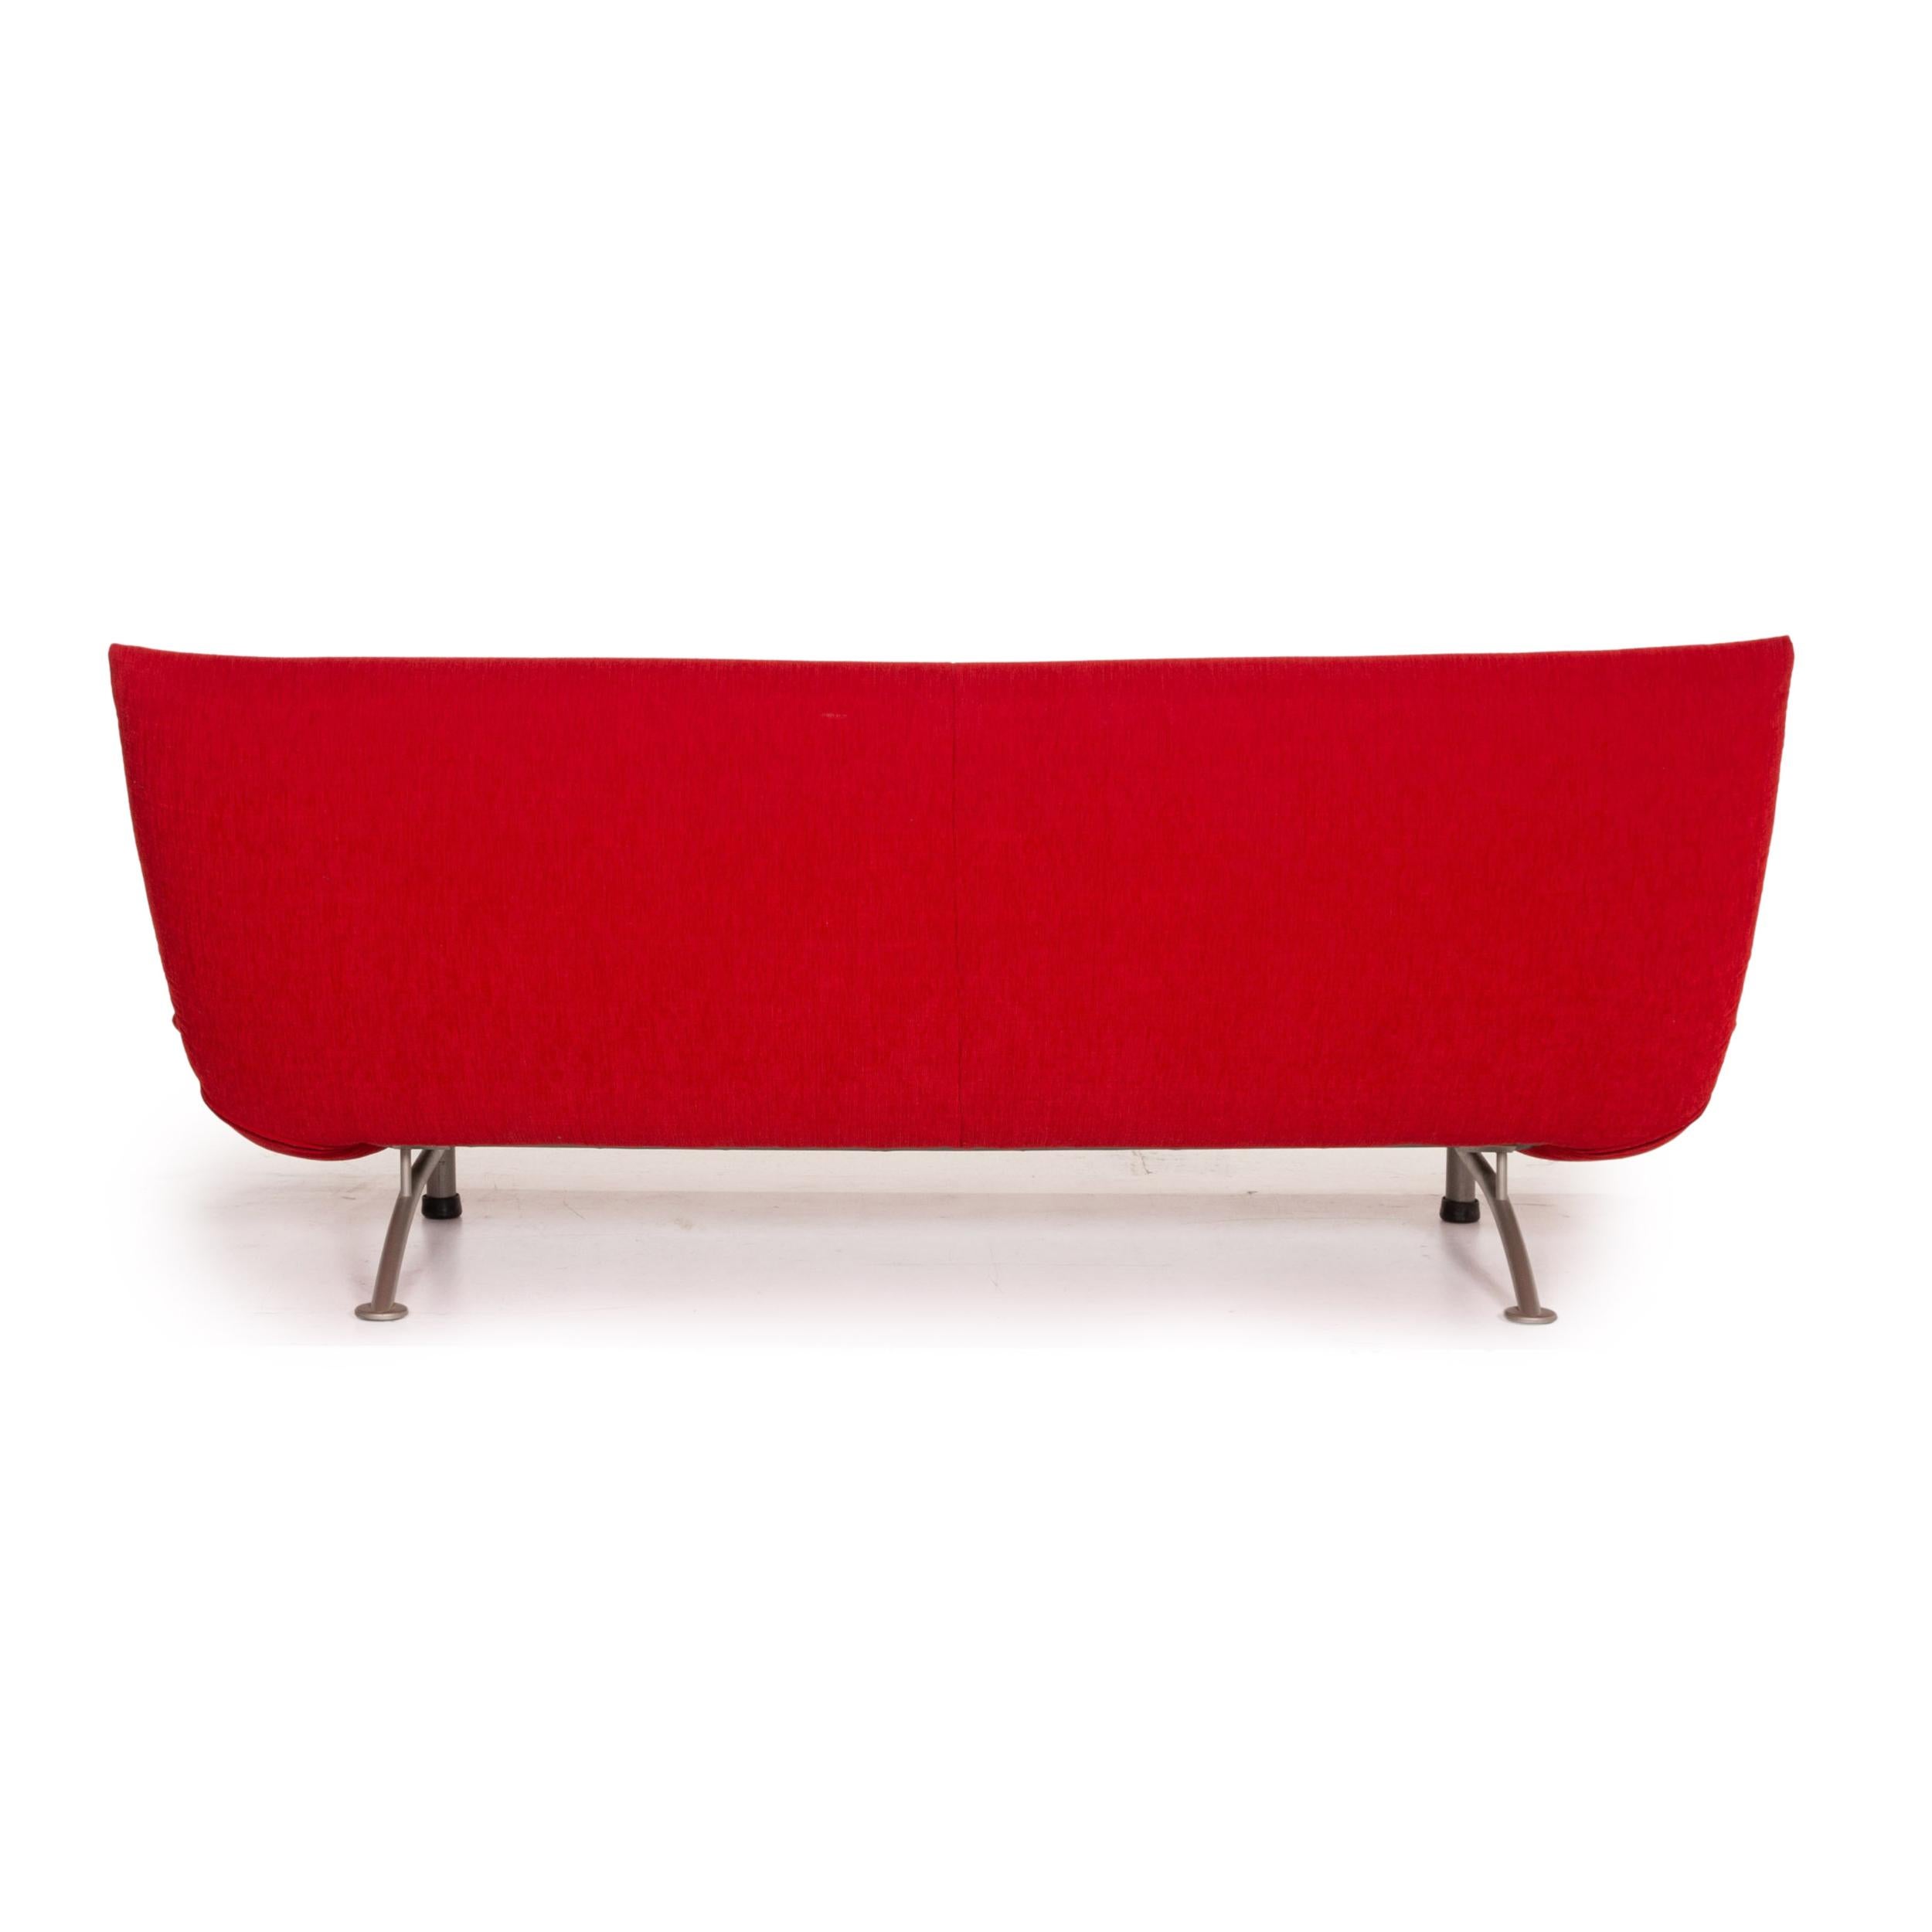 Rolf Benz Fabric Sofa Red Three-seater Couch 2